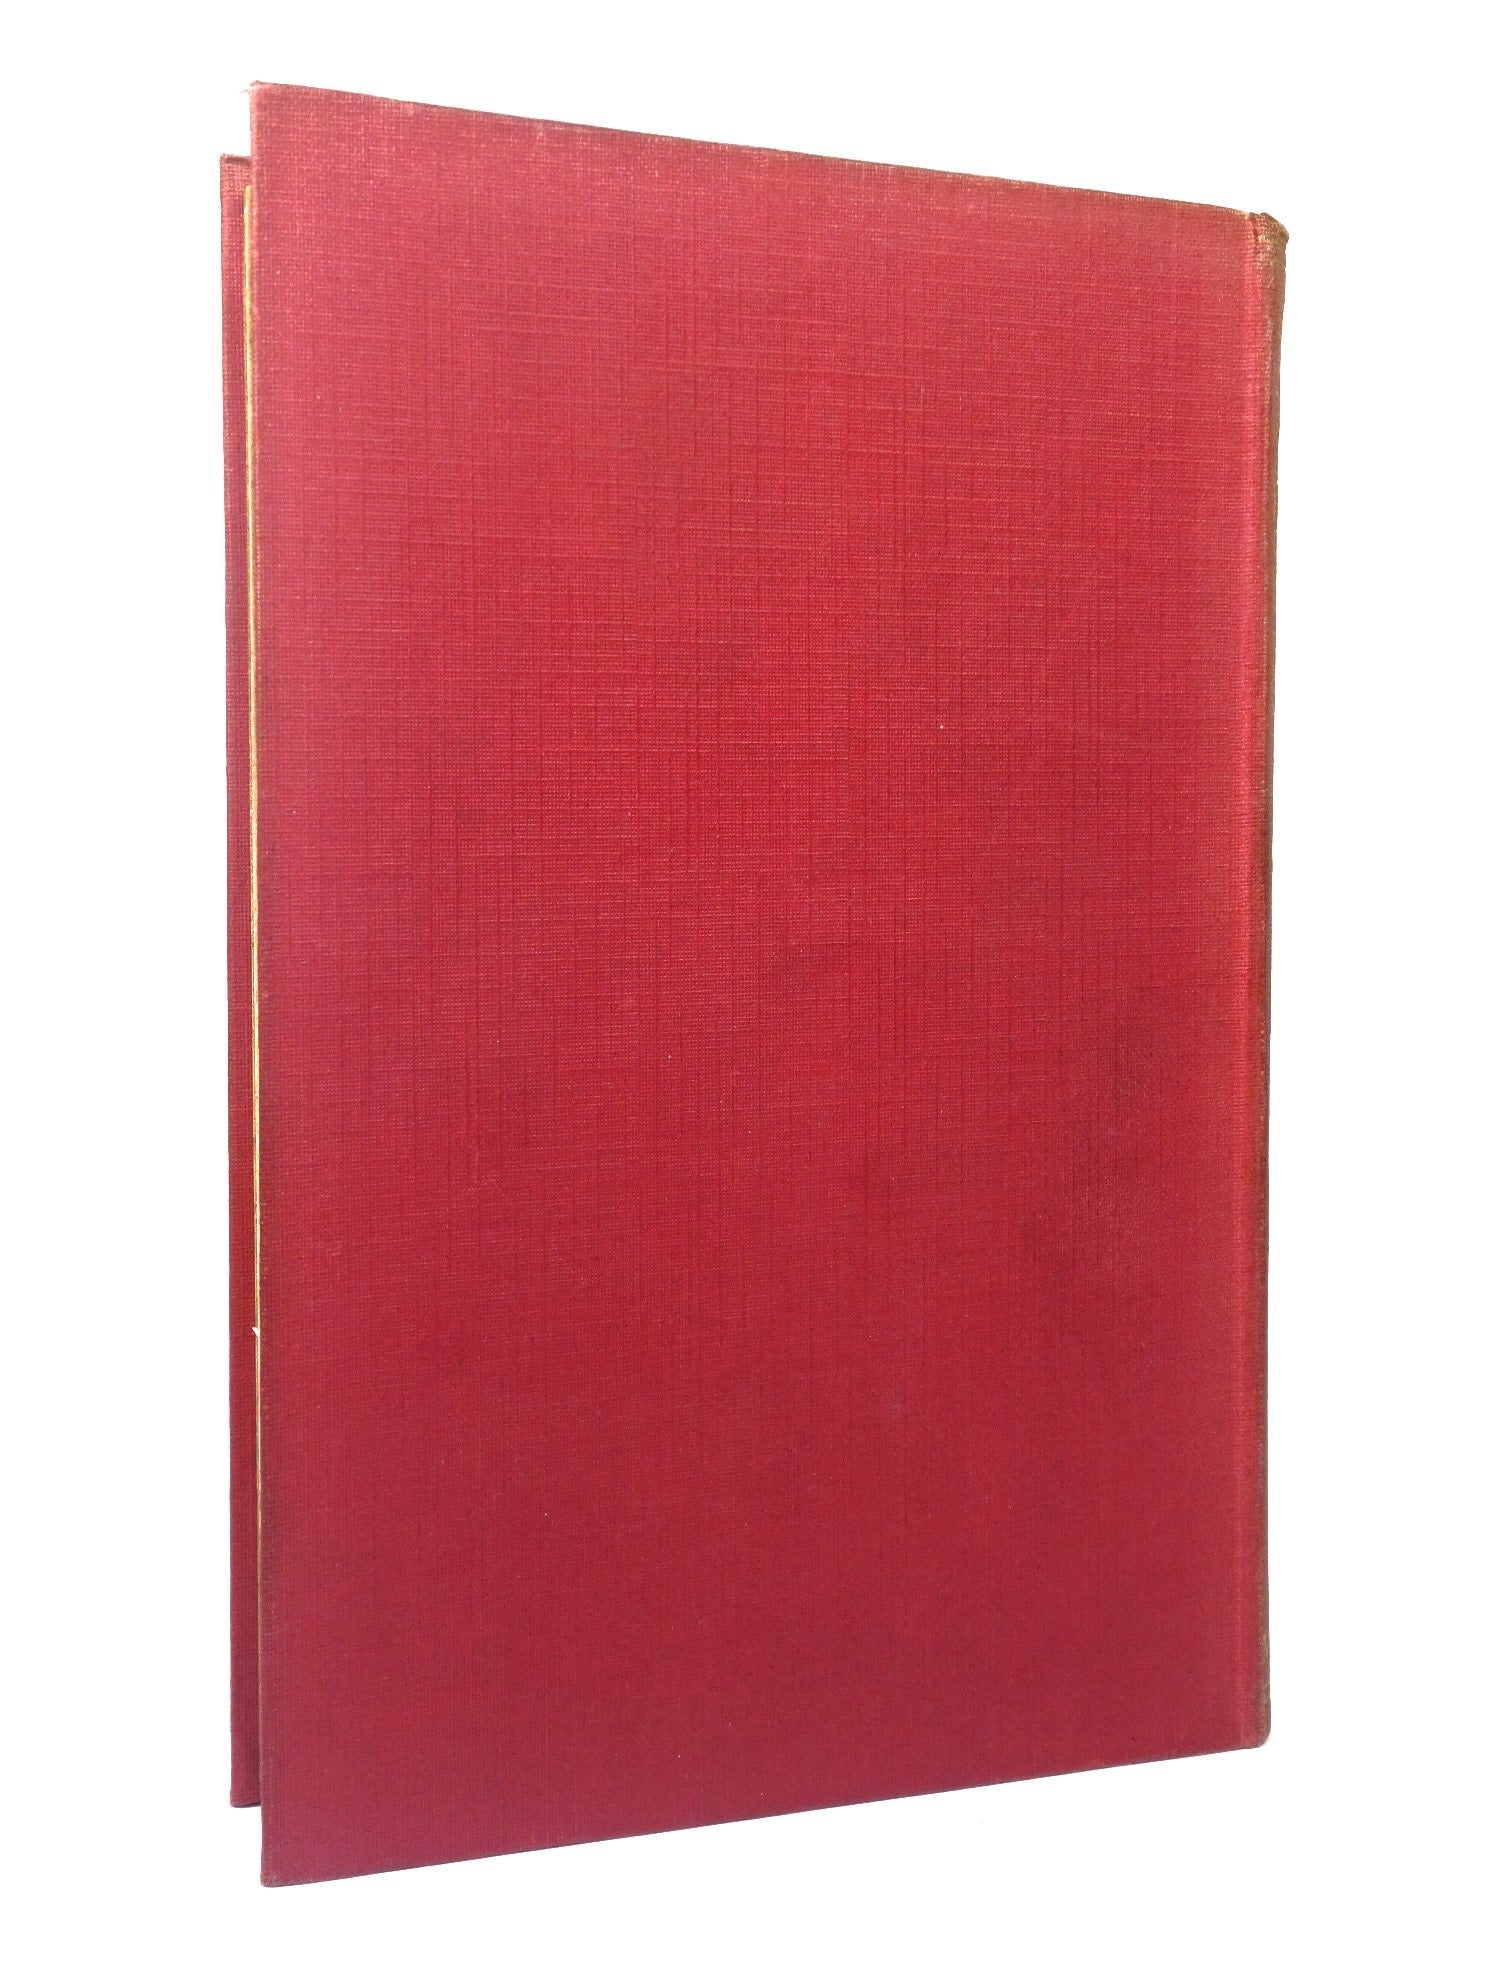 RELATIVITY: THE SPECIAL & THE GENERAL THEORY 1921 ALBERT EINSTEIN SIXTH EDITION